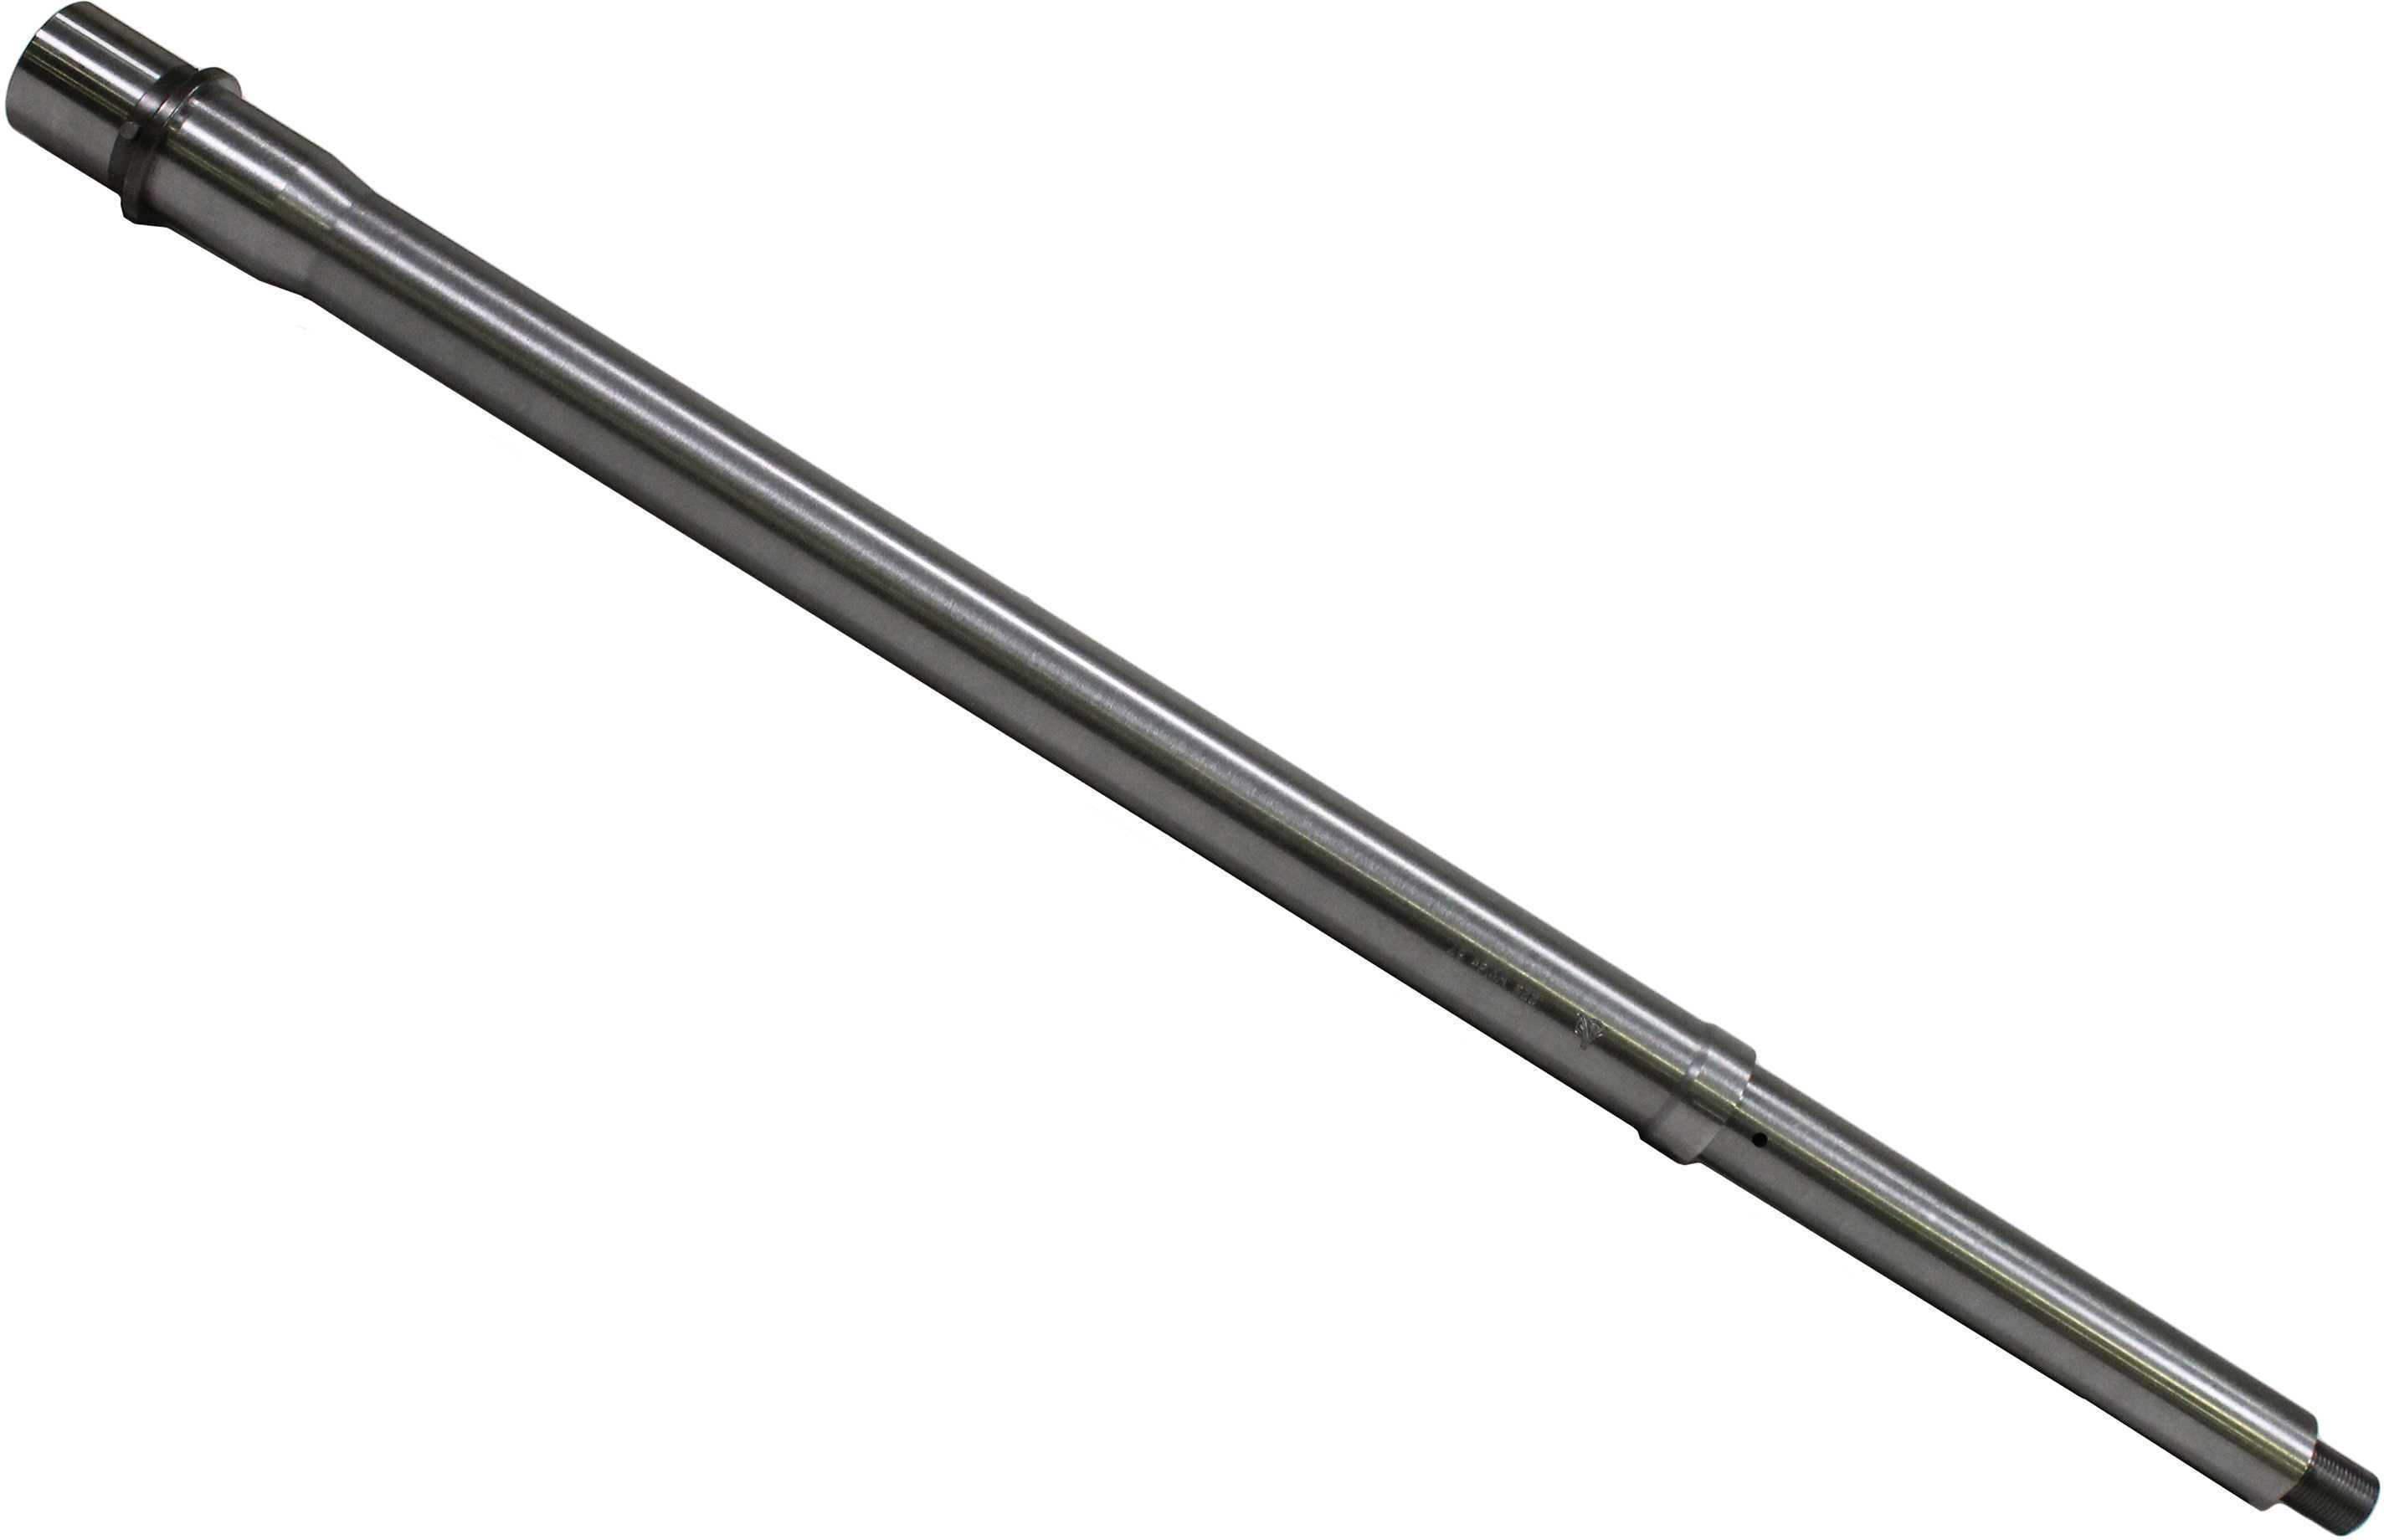 Odin Works Barrel Fits AR15 223 Wylde 18" Threaded 1/2-28 DMR Profile Stainless Steel Rifle Gas Length Includes Tunable